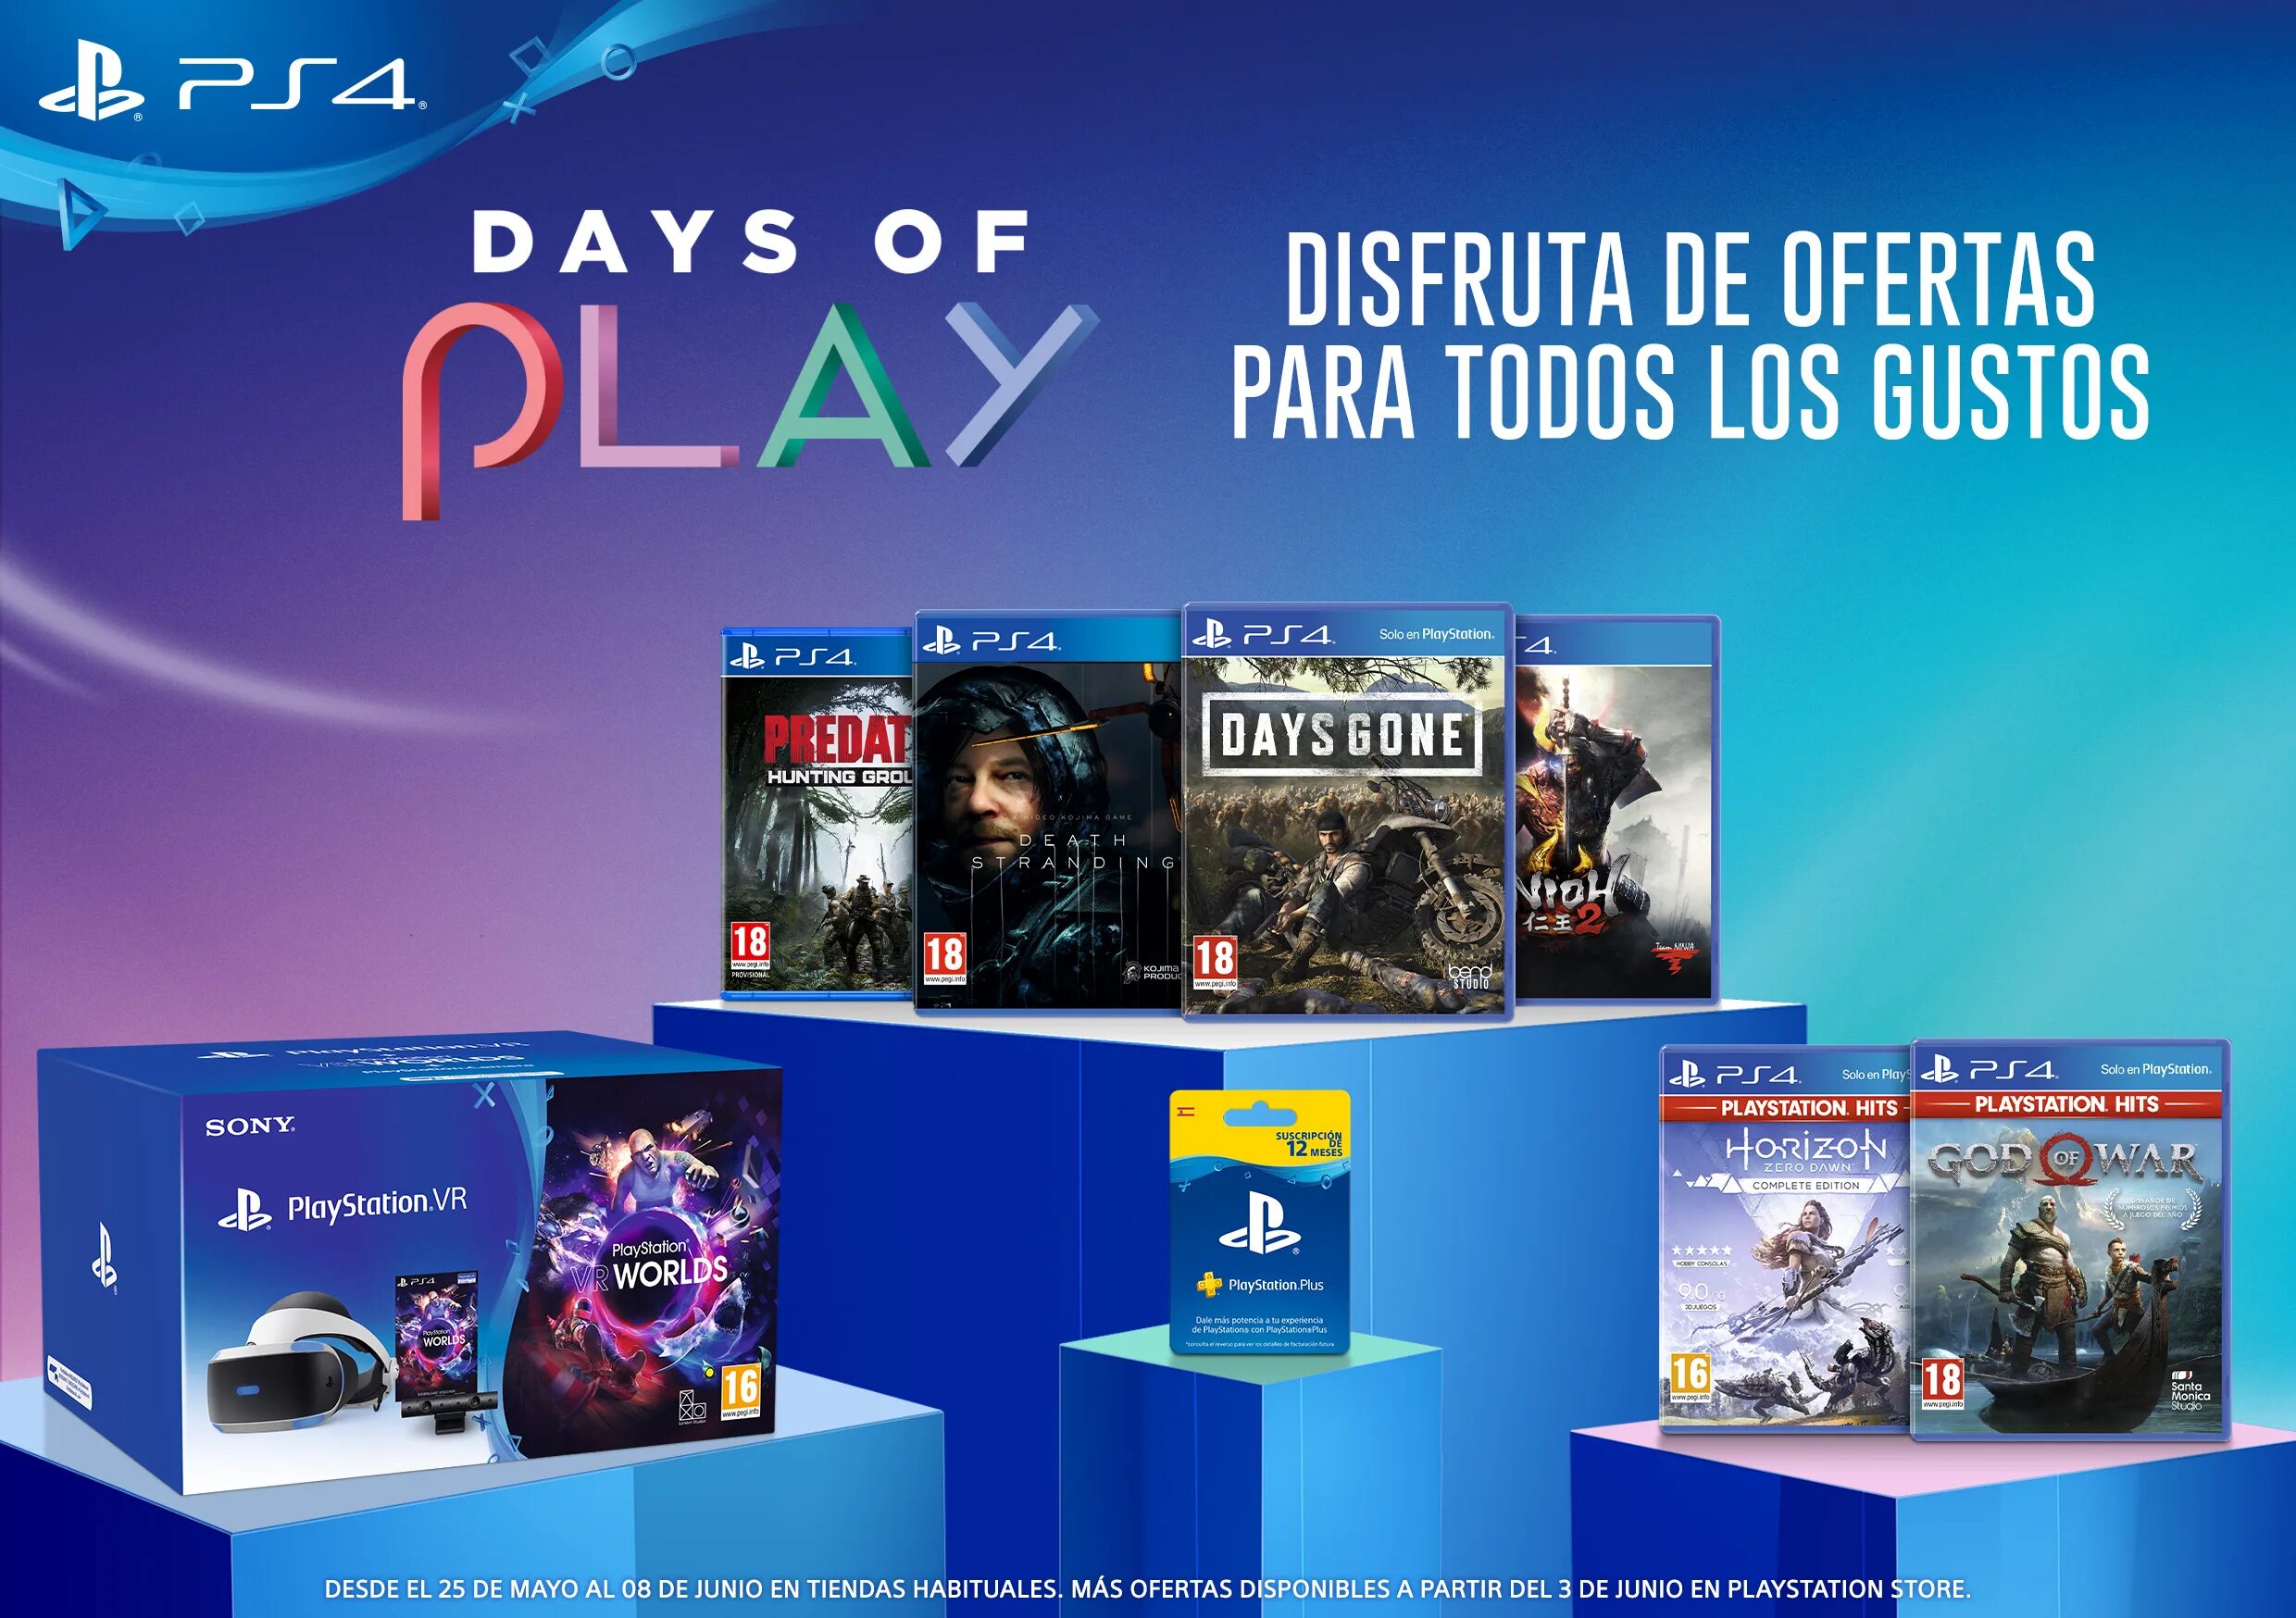 Playstation days. Play Day. PLAYSTATION Store Тетрис. World of Play на PS. PS Store Days of Play обложка в ВК.